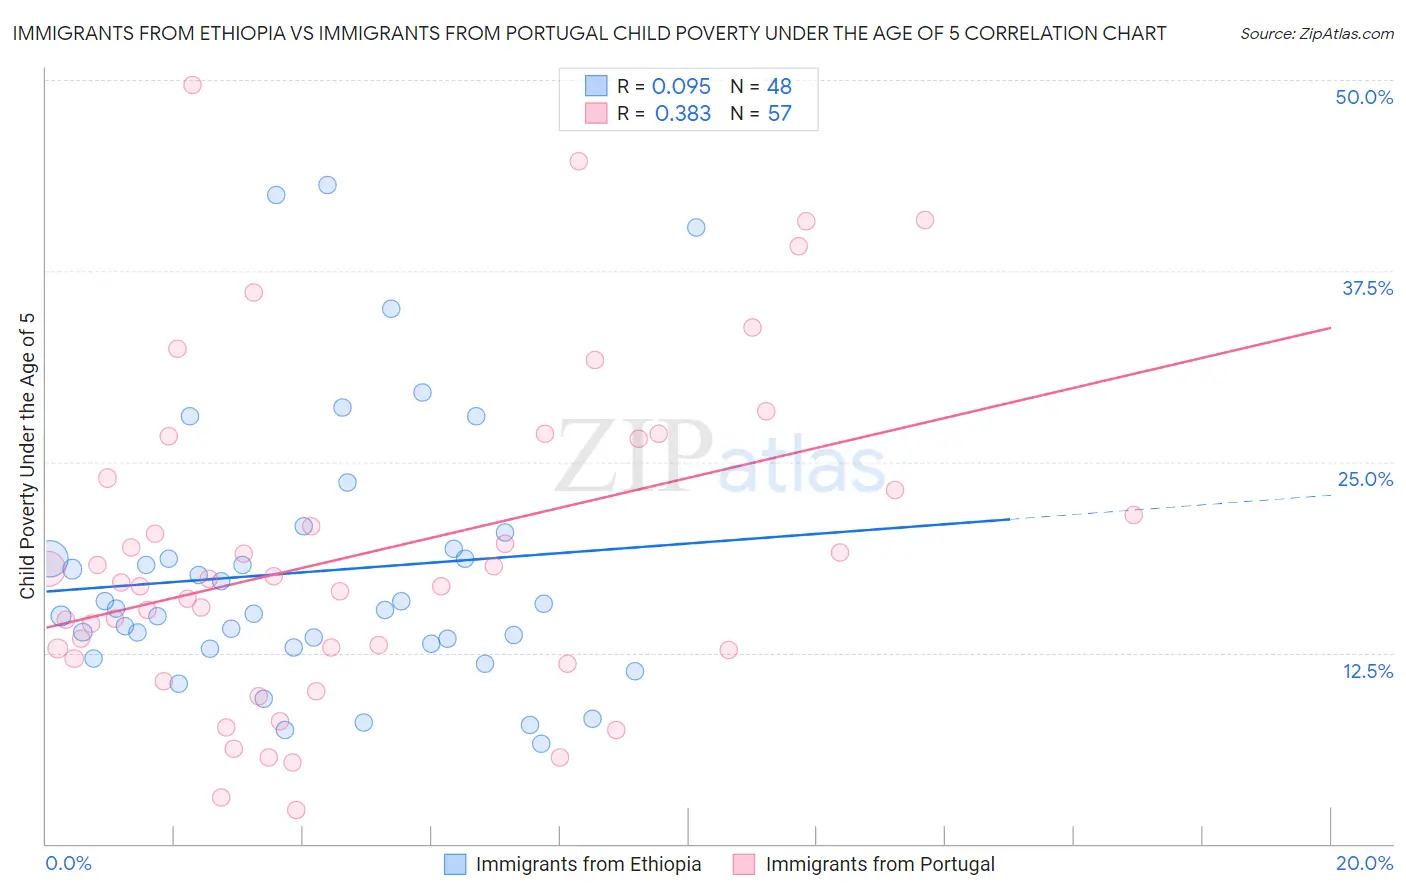 Immigrants from Ethiopia vs Immigrants from Portugal Child Poverty Under the Age of 5